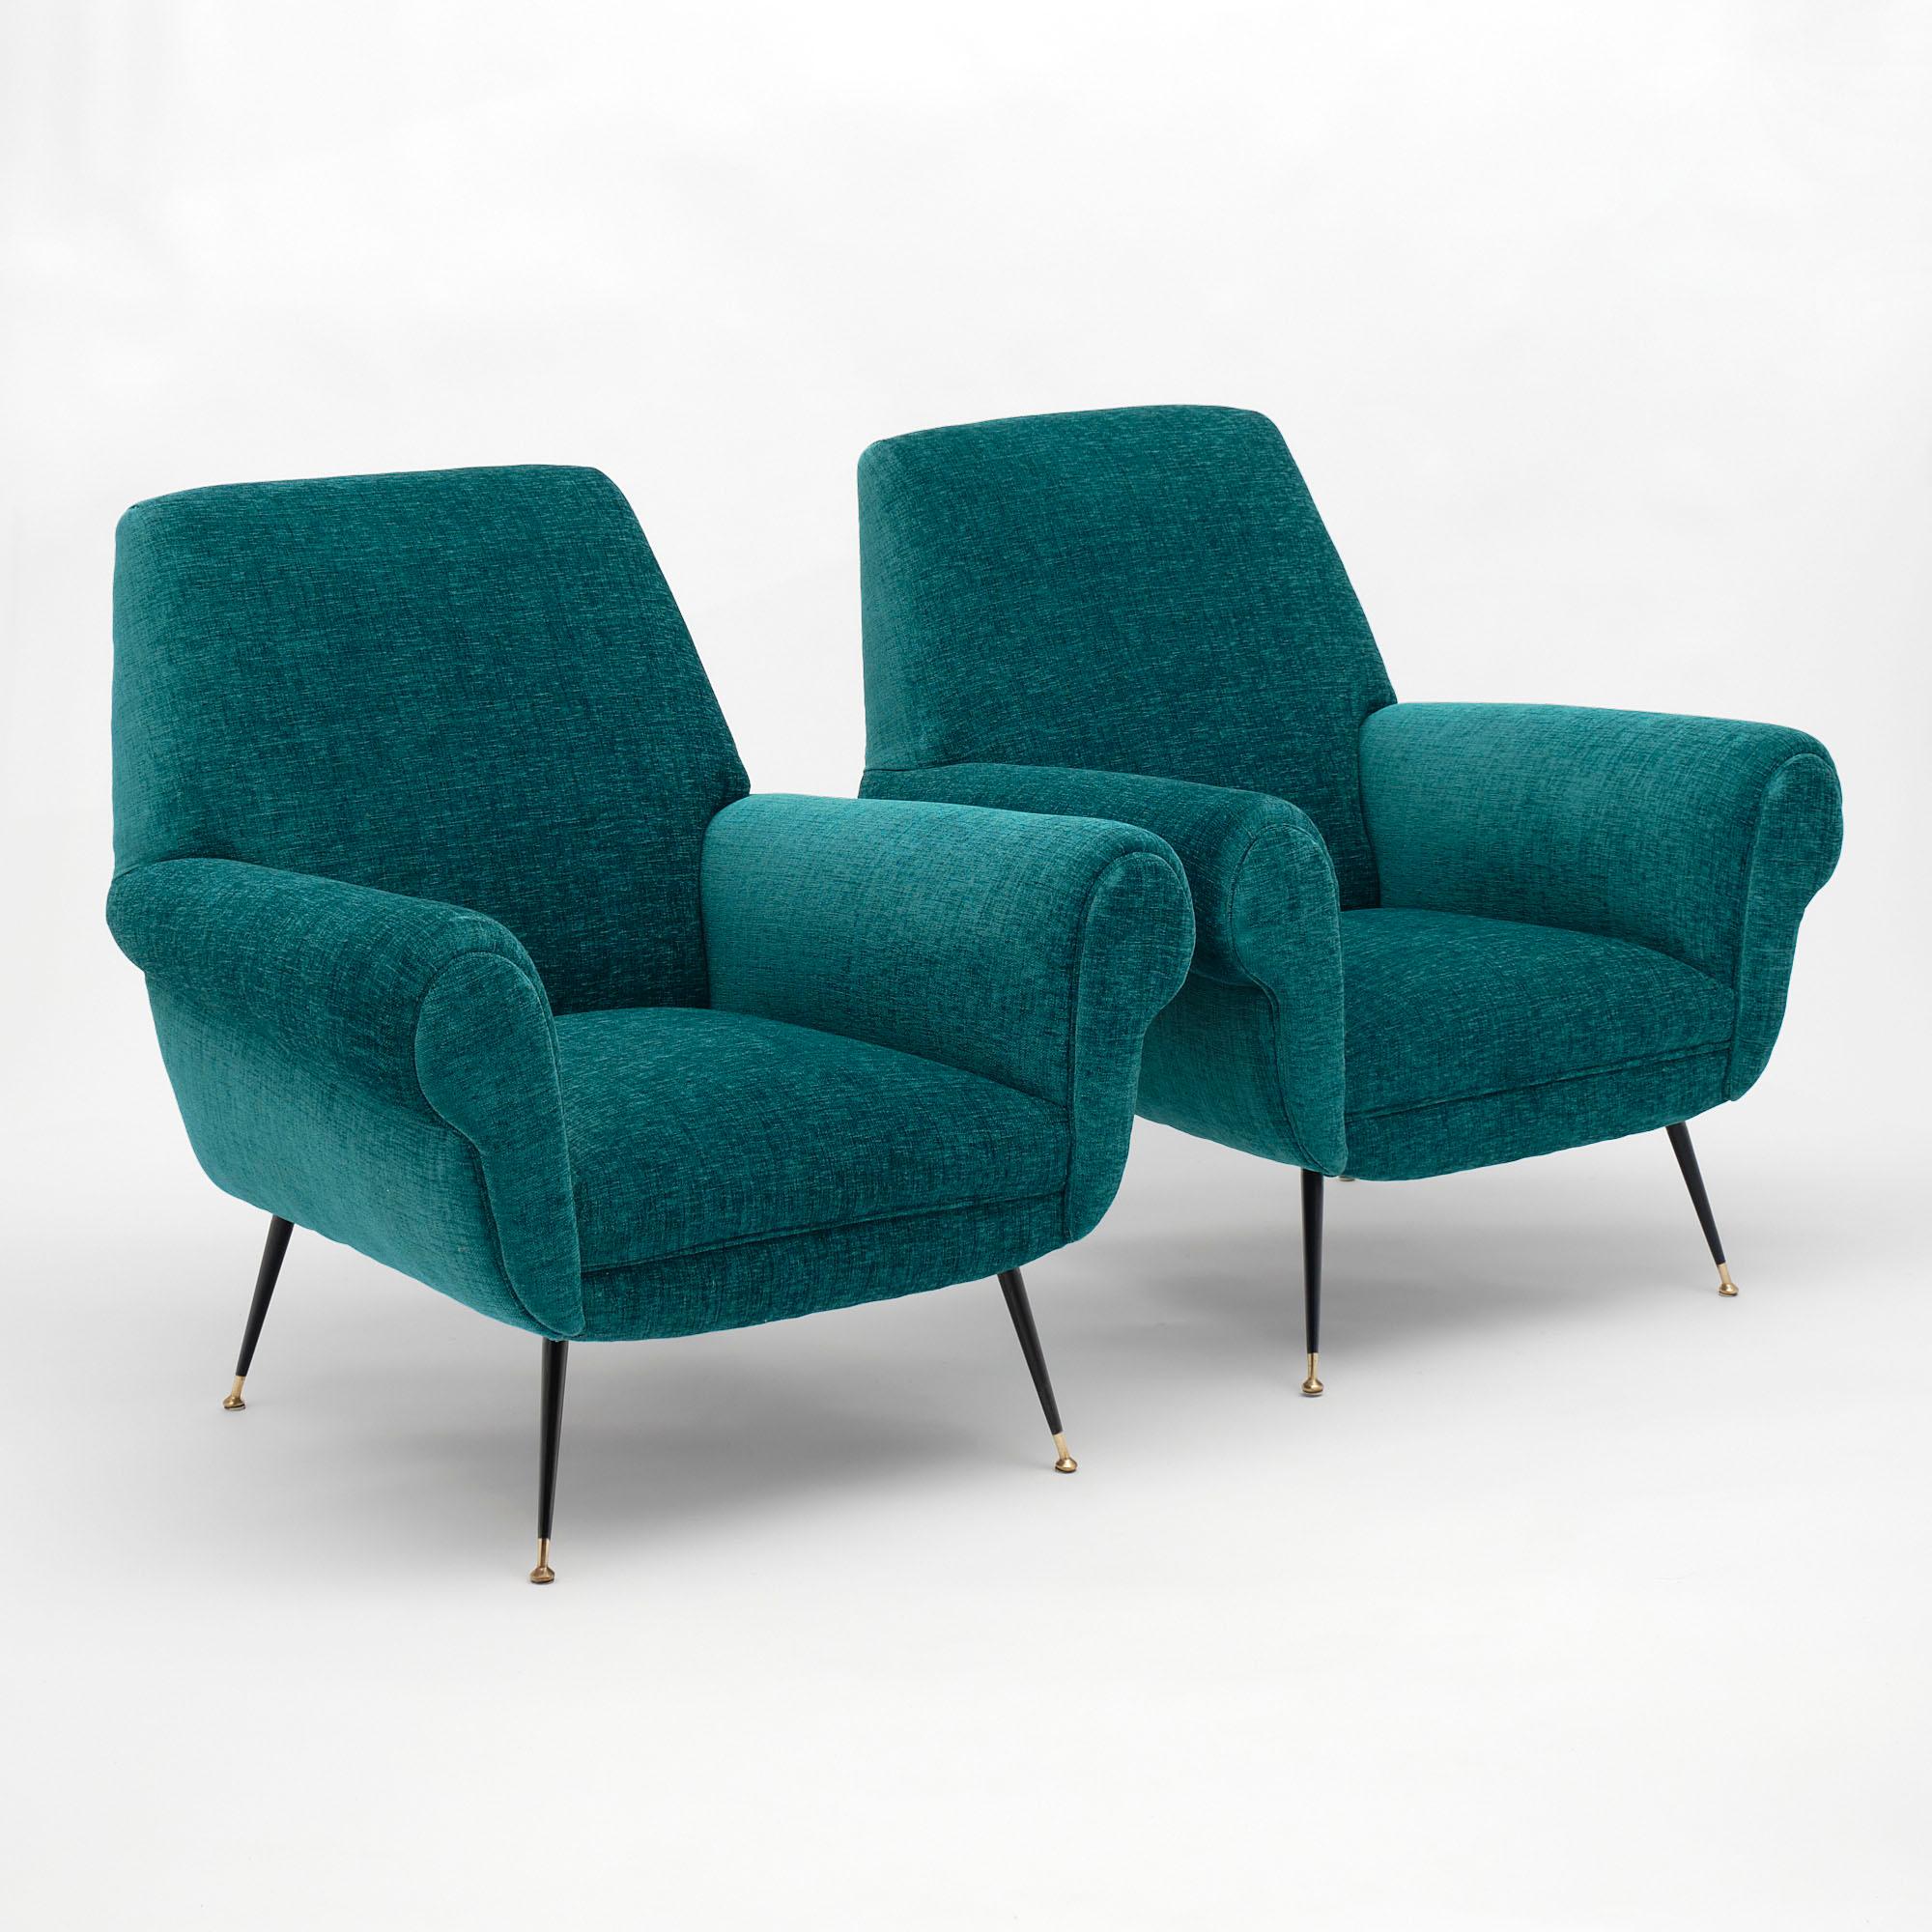 Pair of Italian armchairs by Gigi Radice. Newly upholstered in a teal chenille blend with black lacquered steel and brass stiletto feet.